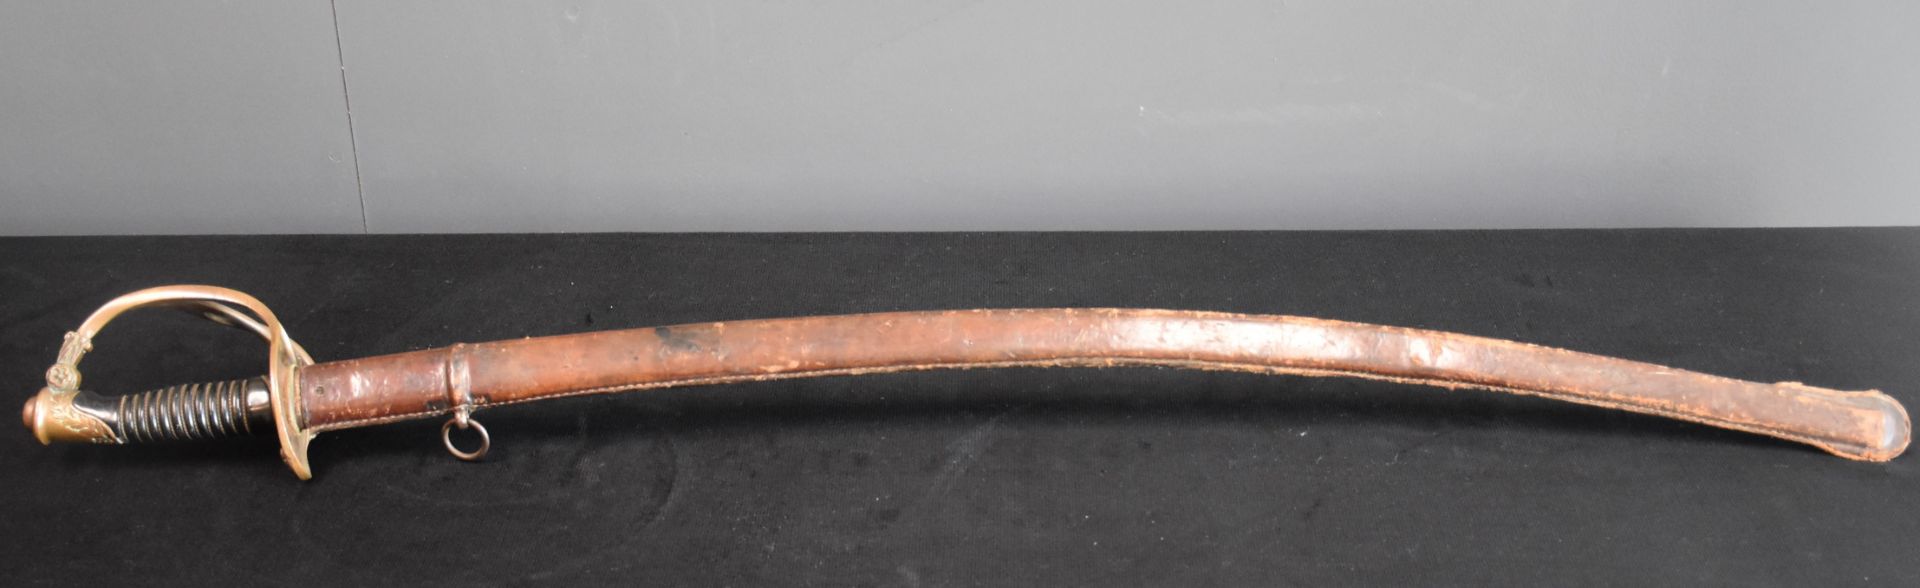 19th century French Saber, Saint Etienne, leather scabbard.